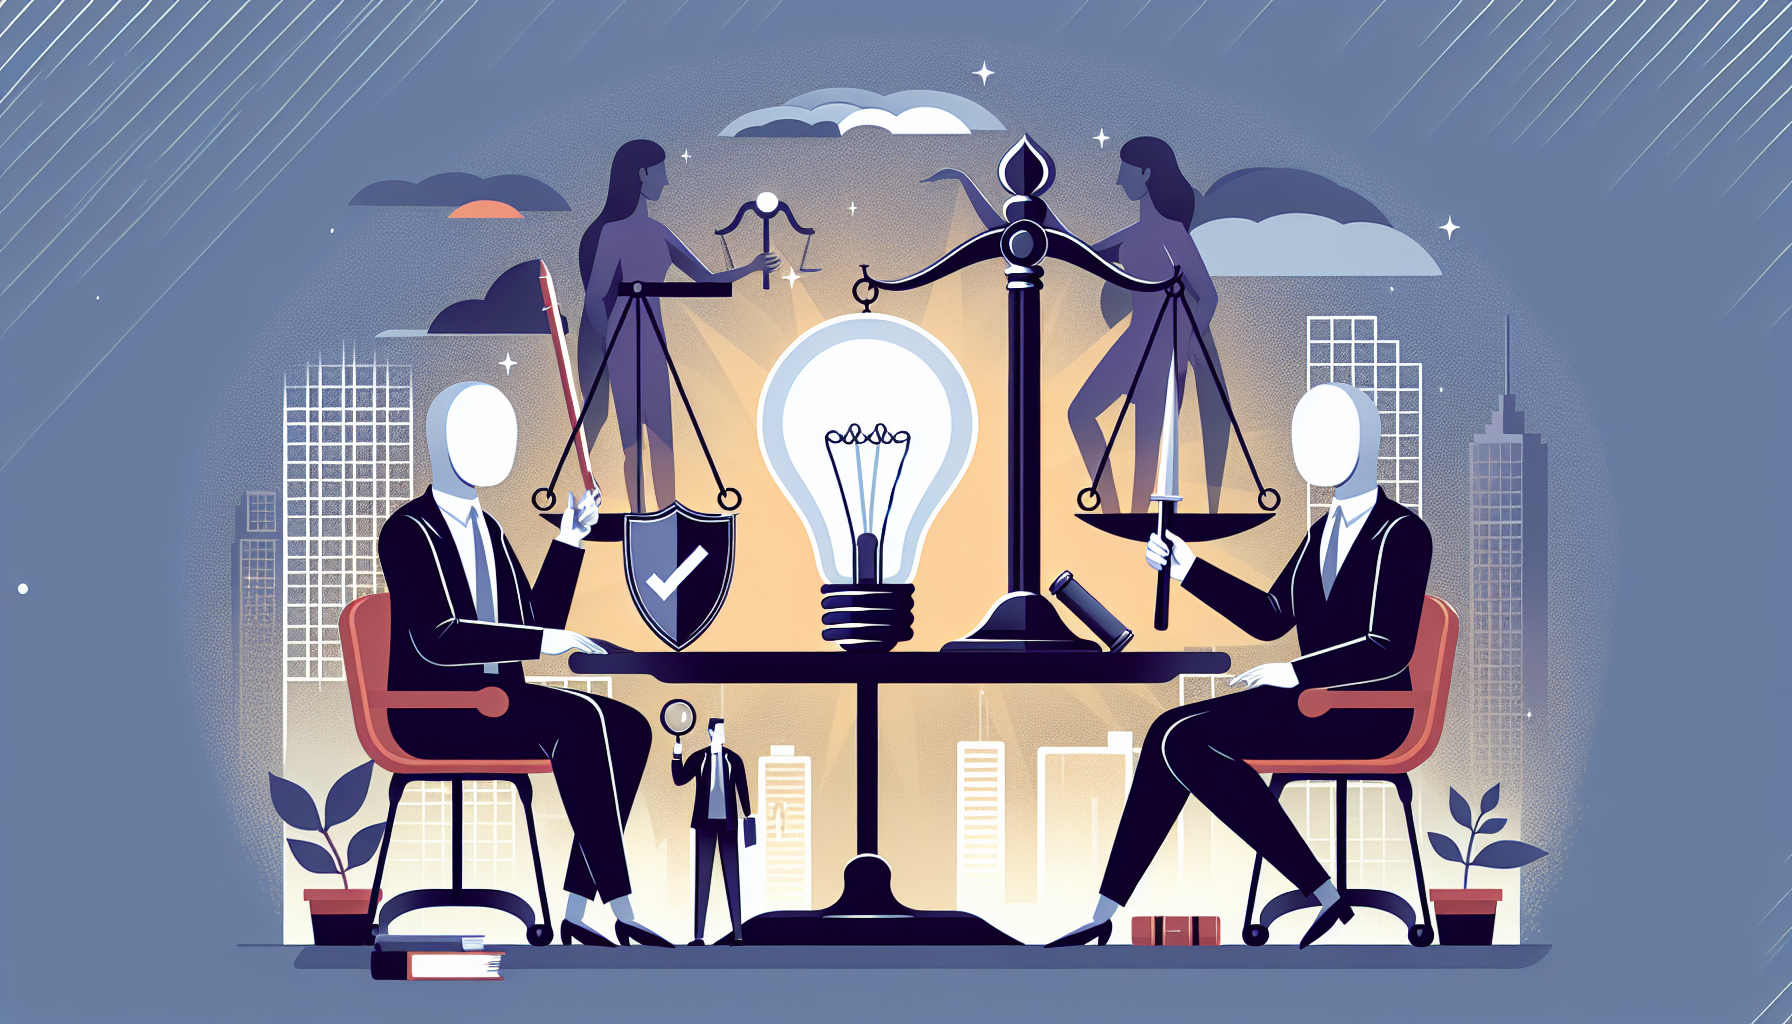 Equity law and intellectual property intersection